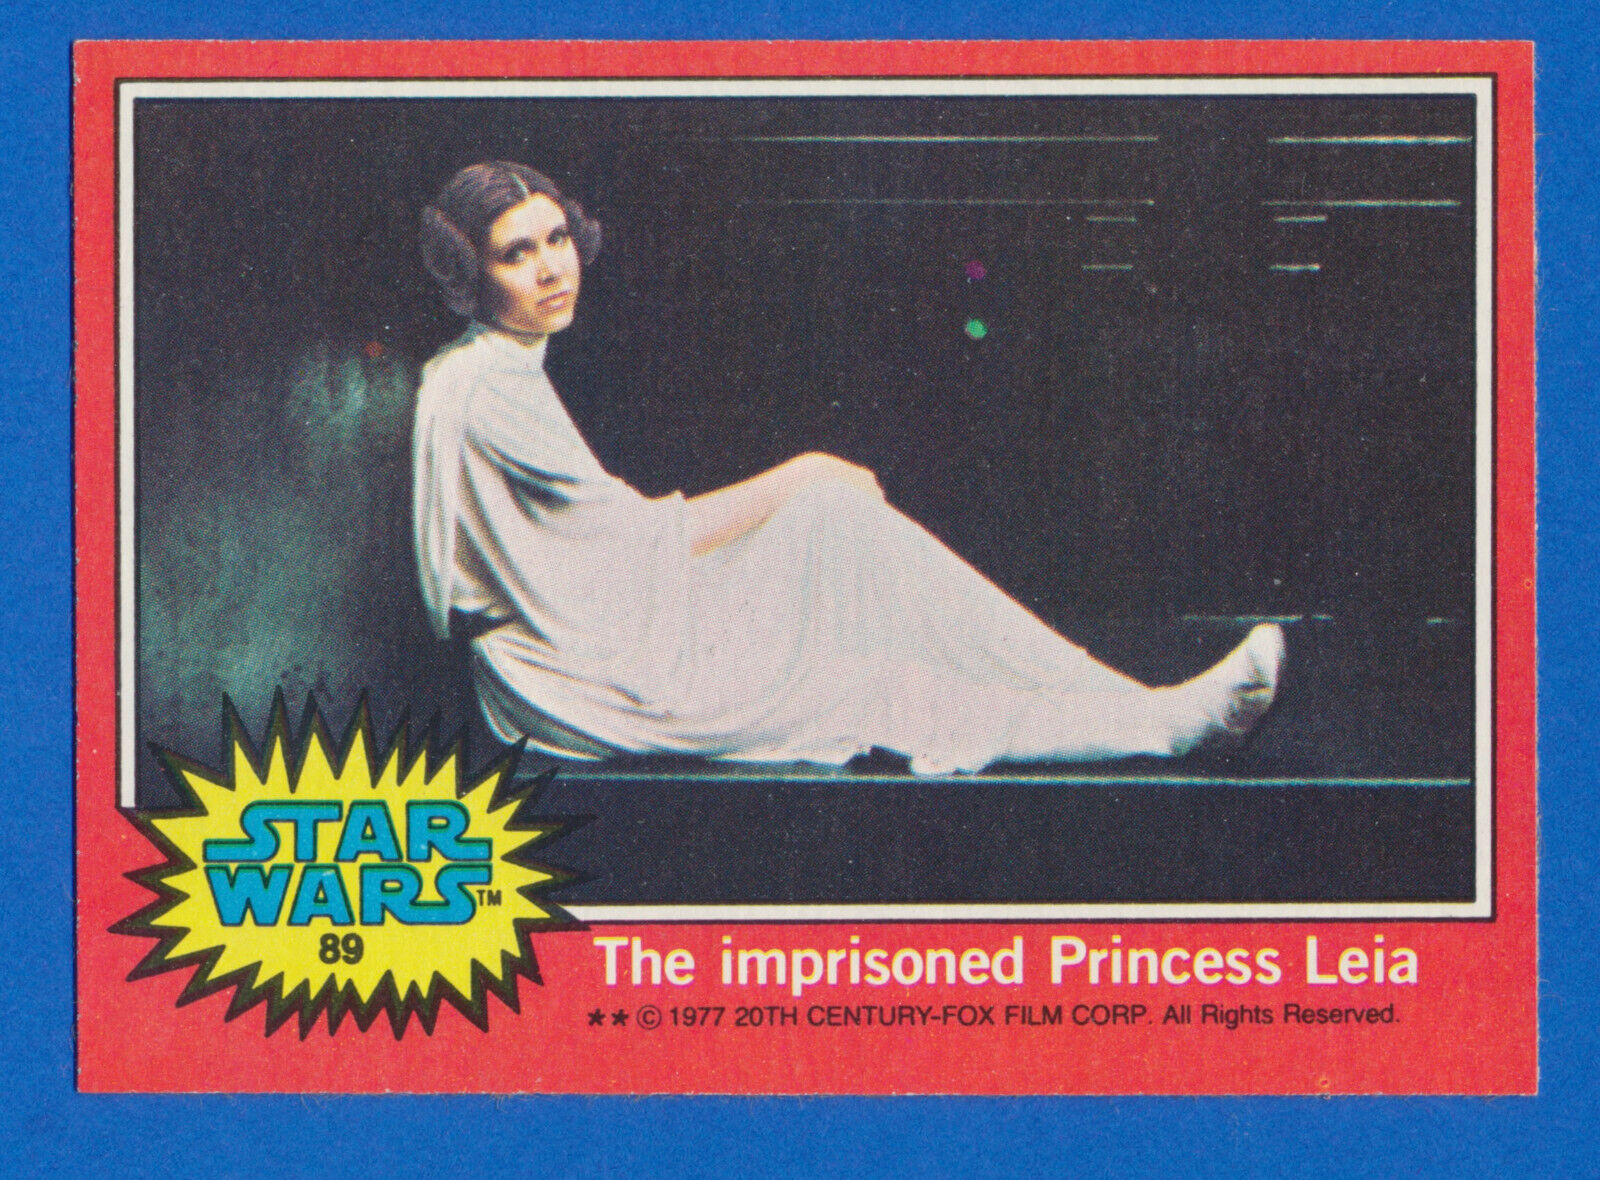 1977 Topps Star Wars #89 The imprisoned Princess Leia